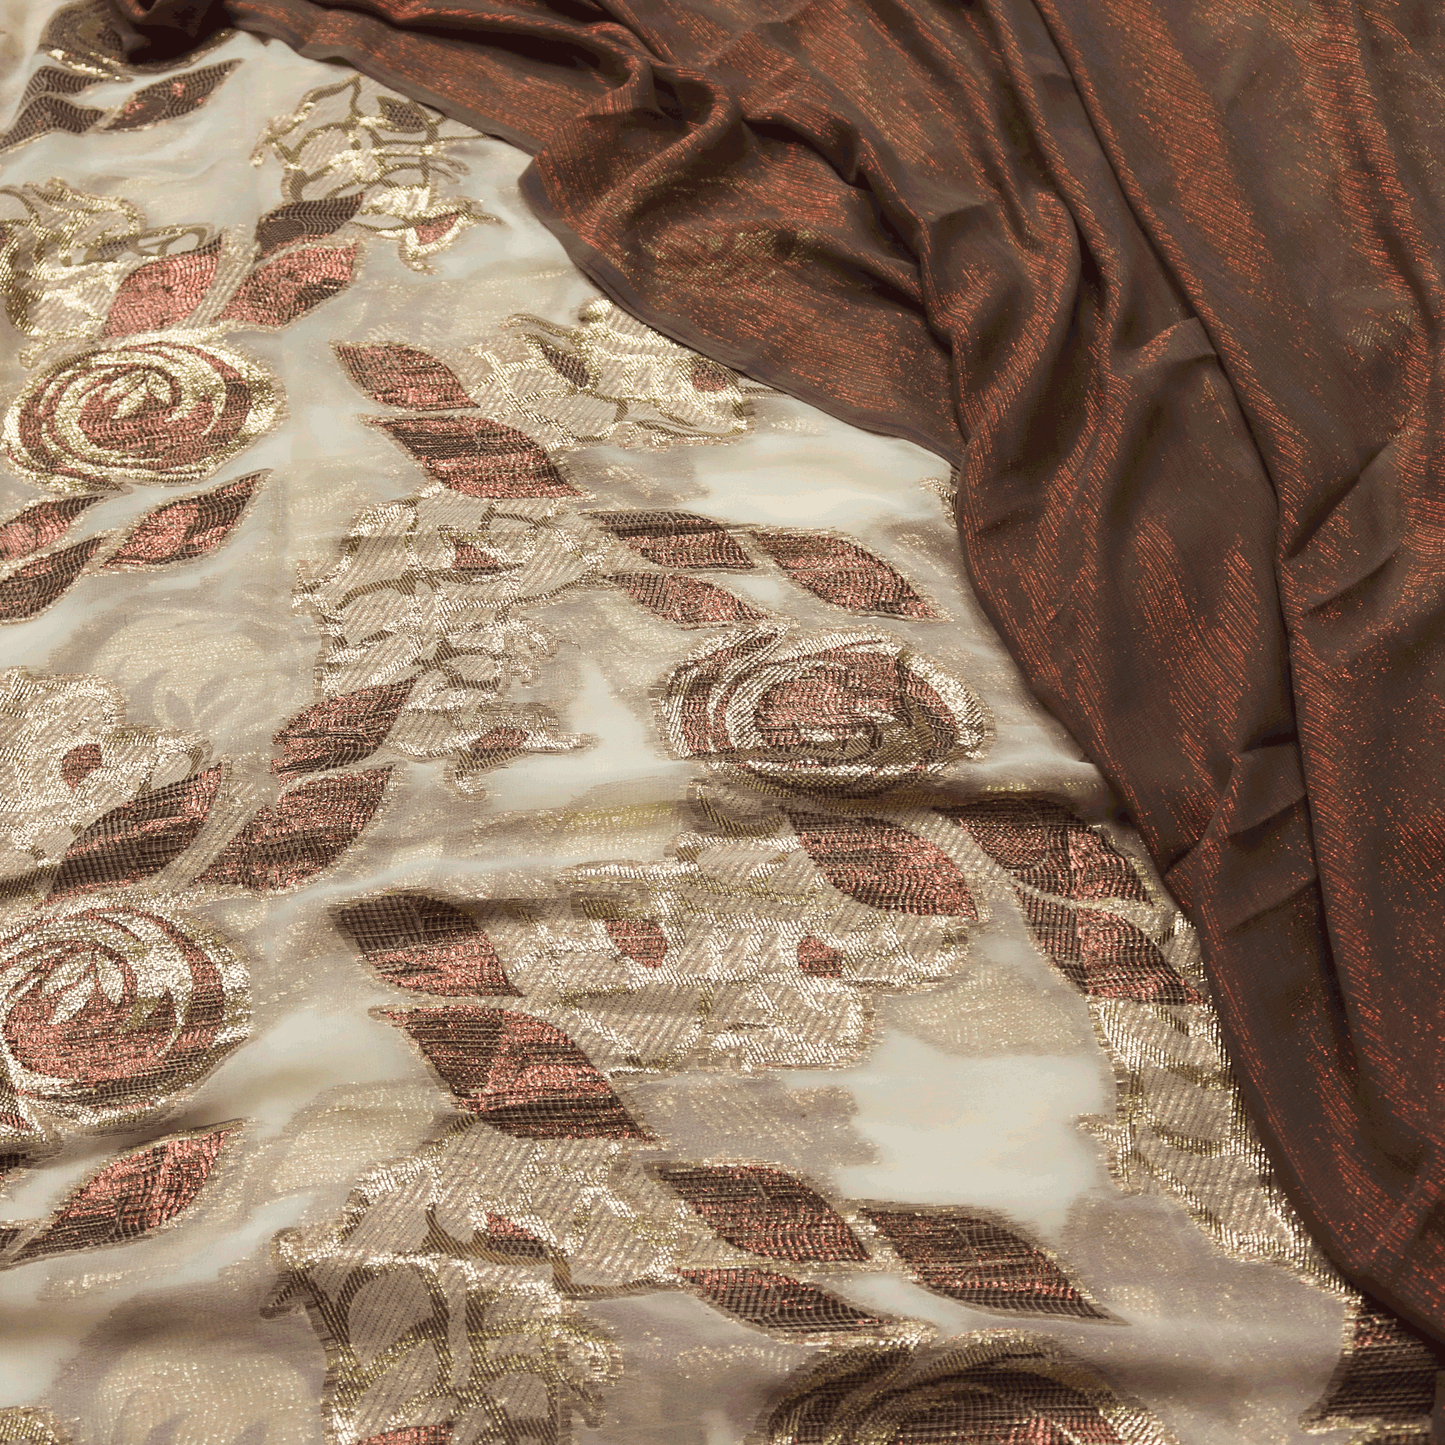 Not your ordinary Somali dirac, feast your eyes on our beautiful Beige on Dark Dirac fransawi, made from fine fabric with intricate floral design patterns. This dirac is definitely going to turn heads.